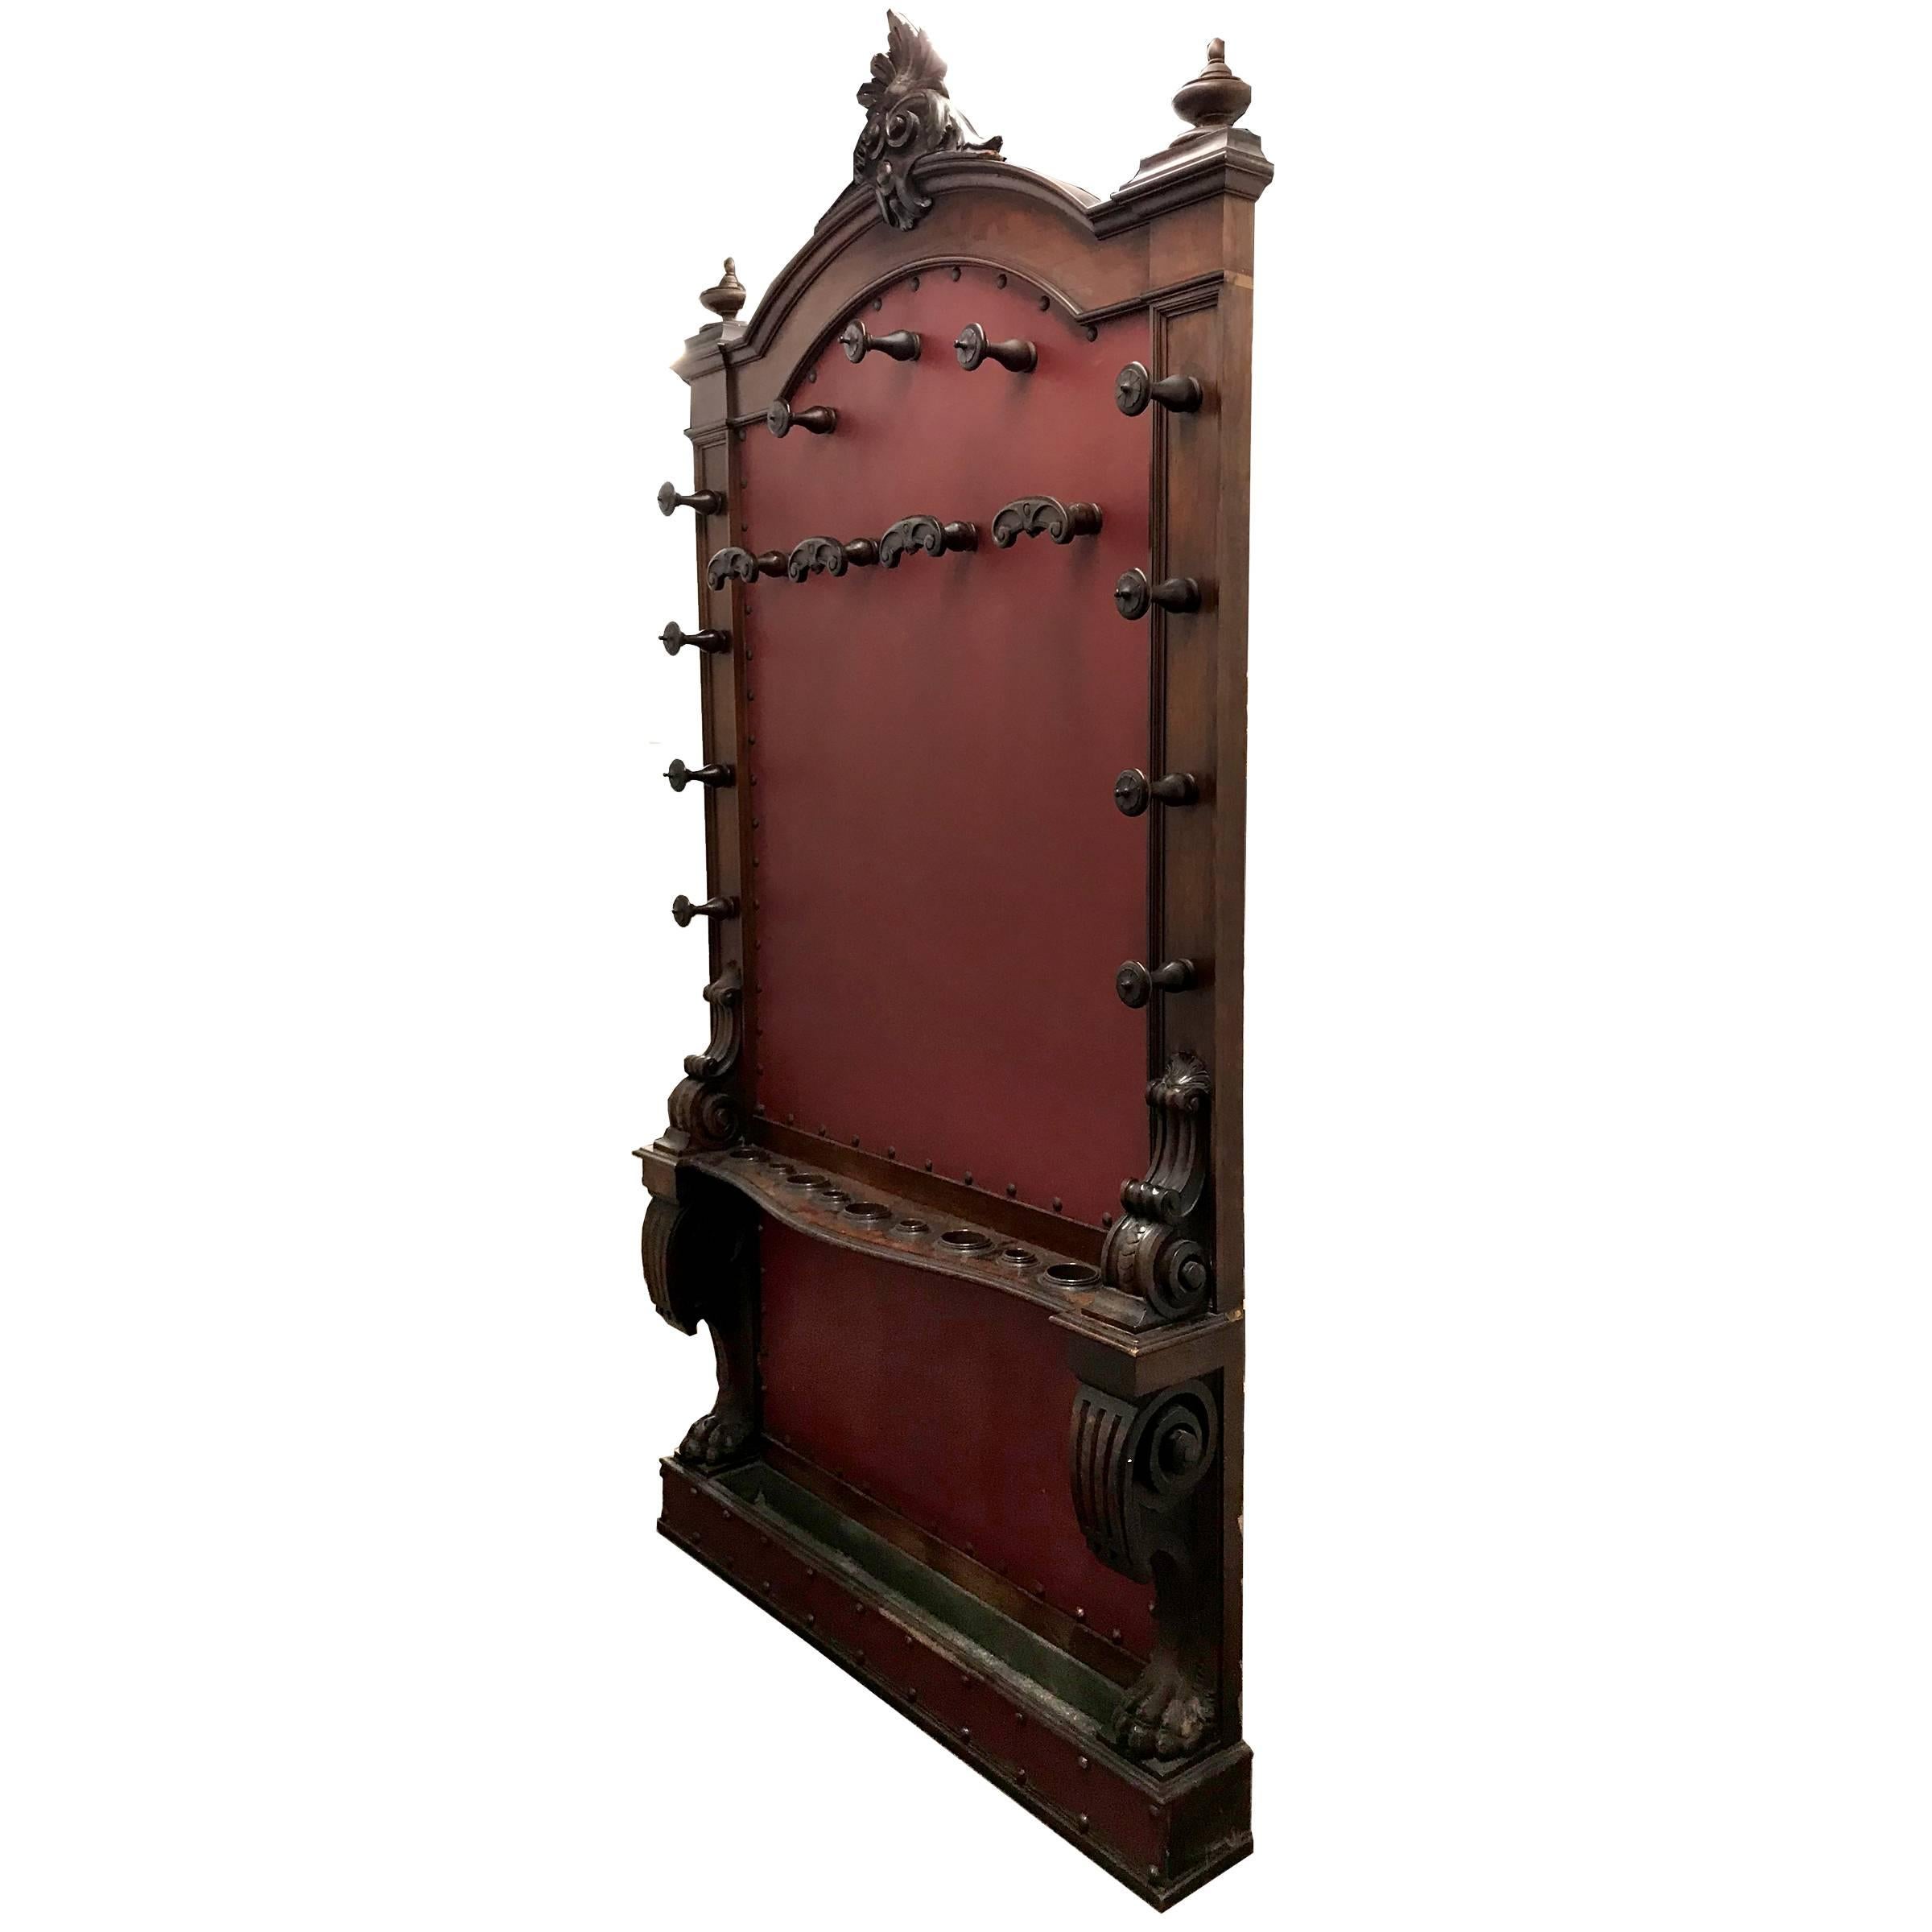 An impressive 19th century Italian walnut hall tree with four coat hooks, eleven hat hooks, and nine spots for umbrellas and walking sticks. There is a zinc lined tray at the bottom for holding water from the umbrellas. The umbrella rack is